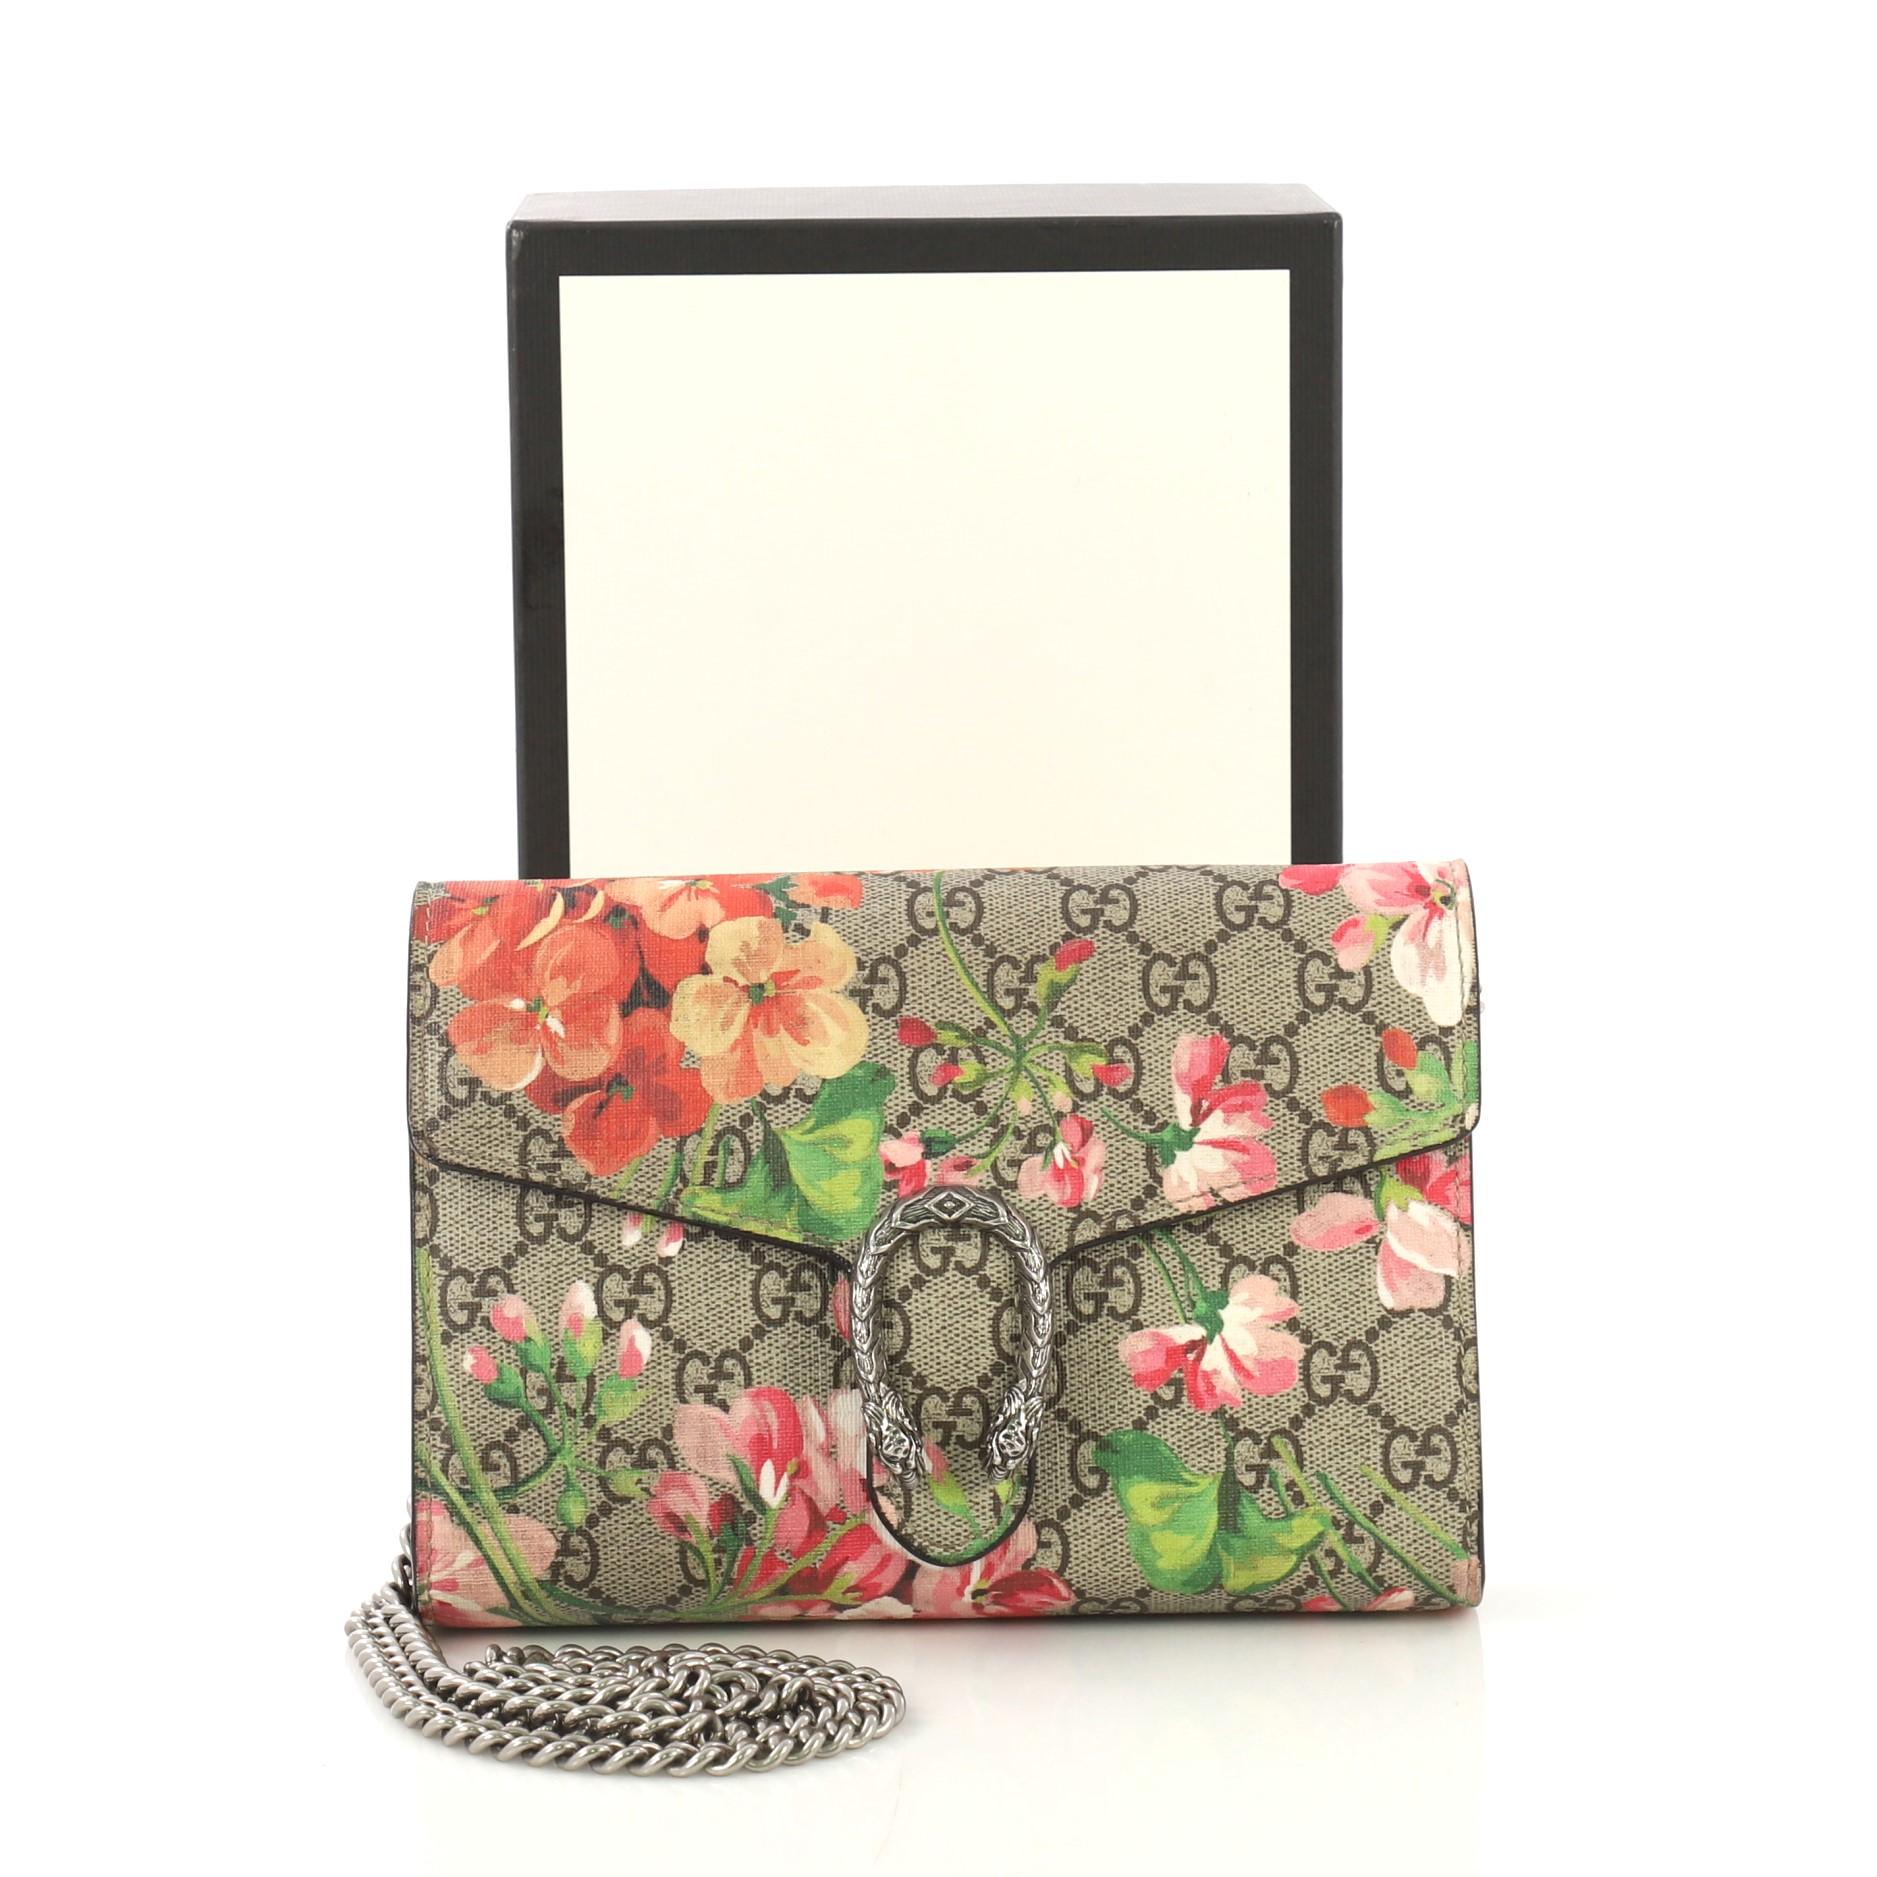 This Gucci Dionysus Chain Wallet Blooms Print GG Coated Canvas Small, crafted from brown blooms print GG coated canvas, features chain link strap, textured tiger head spur detail on its flap, and aged silver-tone hardware. Its snap button closure